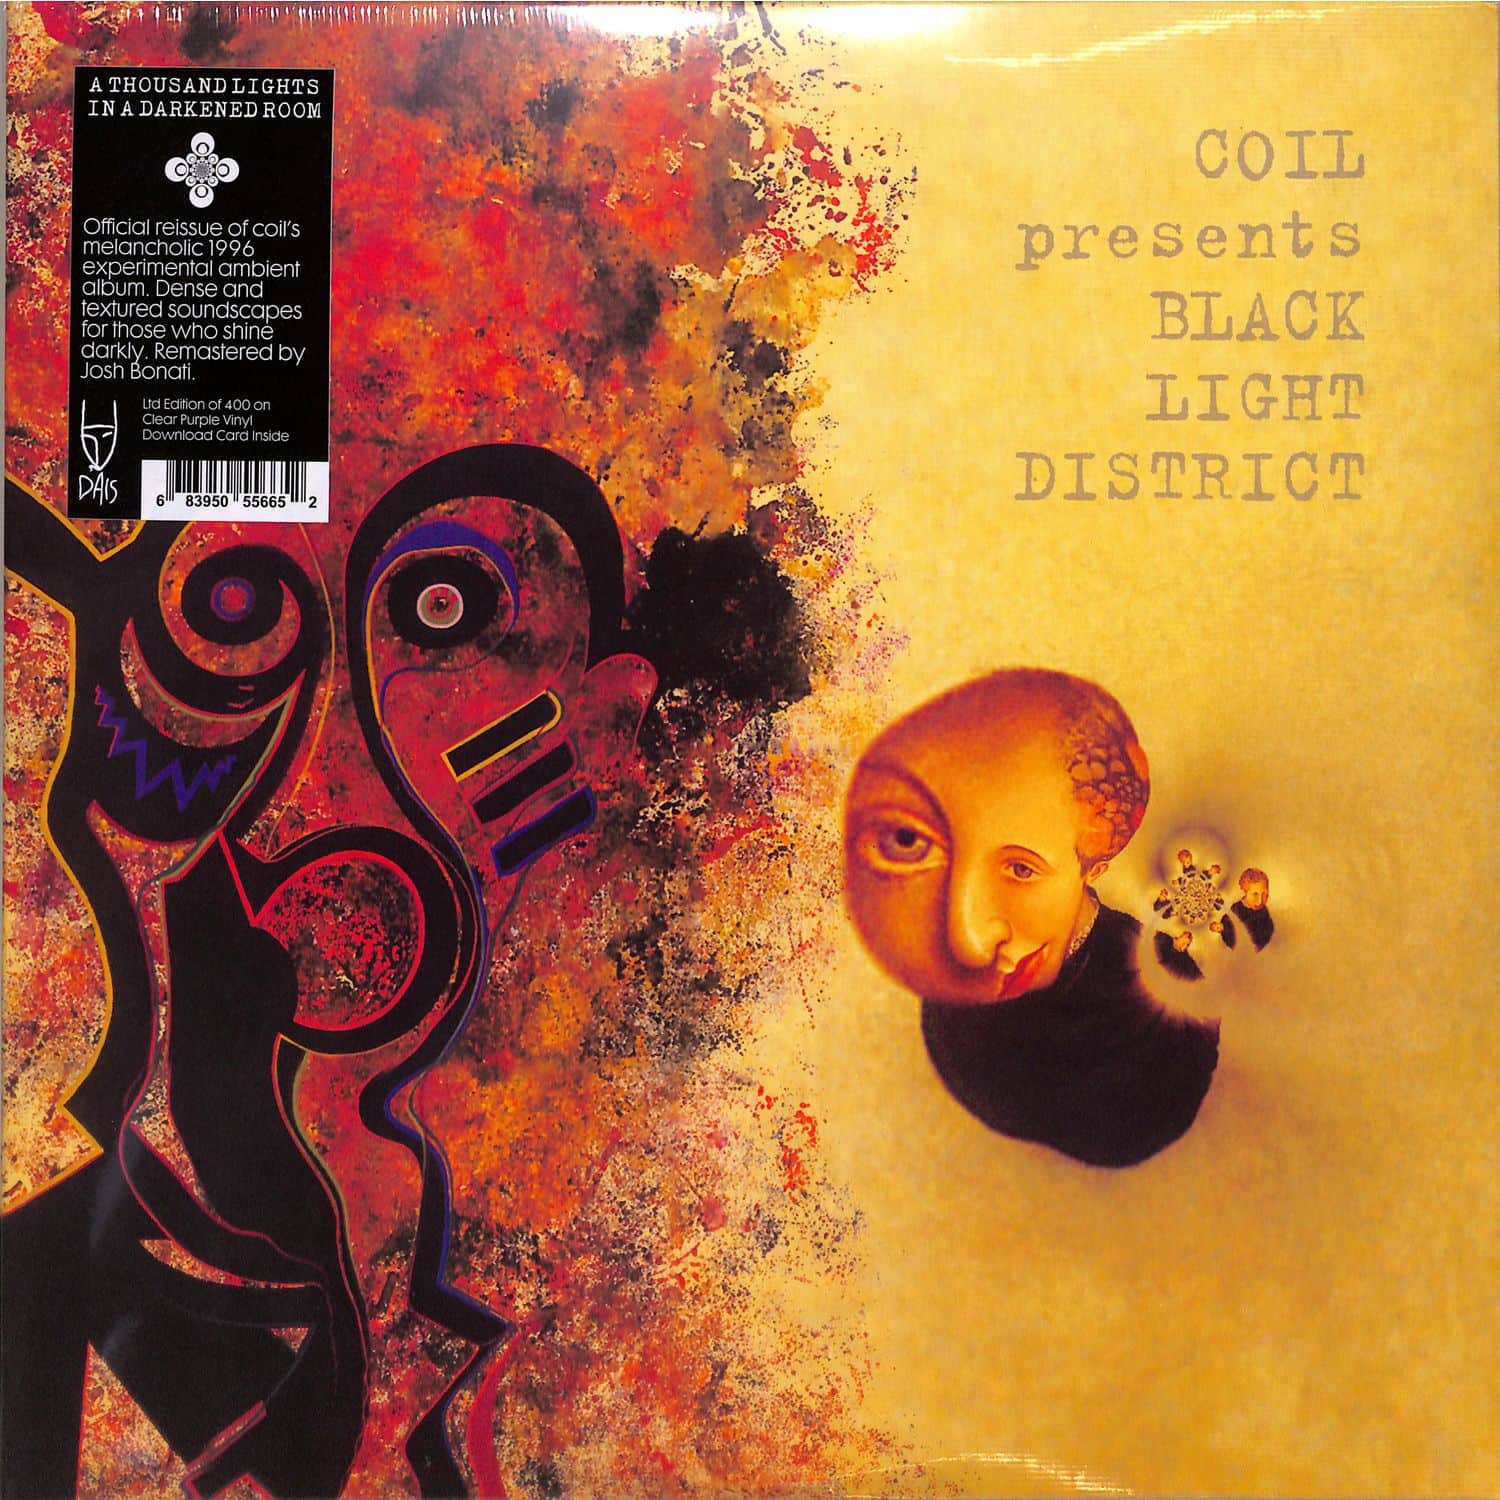 Coil presents Black Light District  - A THOUSAND LIGHTS IN A DARKENED ROOM 